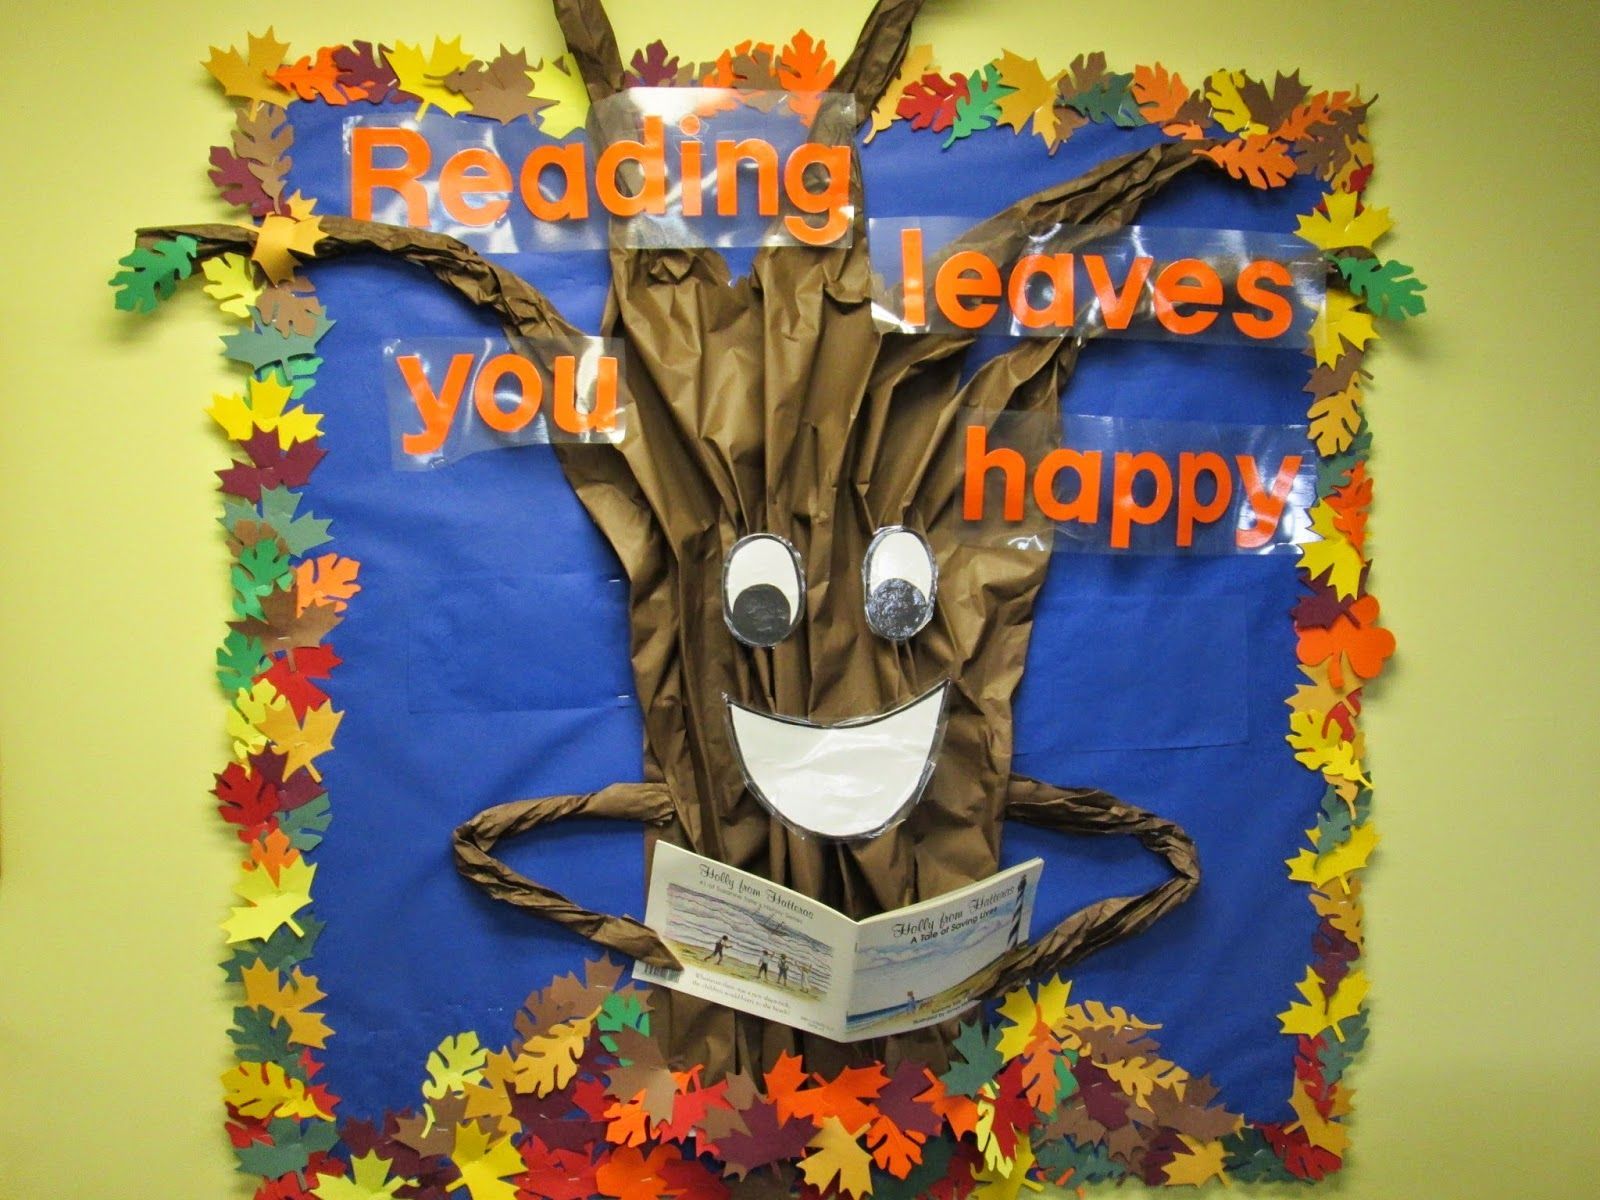 Lorris School Library Blog: School Library Media Center Bulletin Boards-(Check my other posts for more bulletin board images)